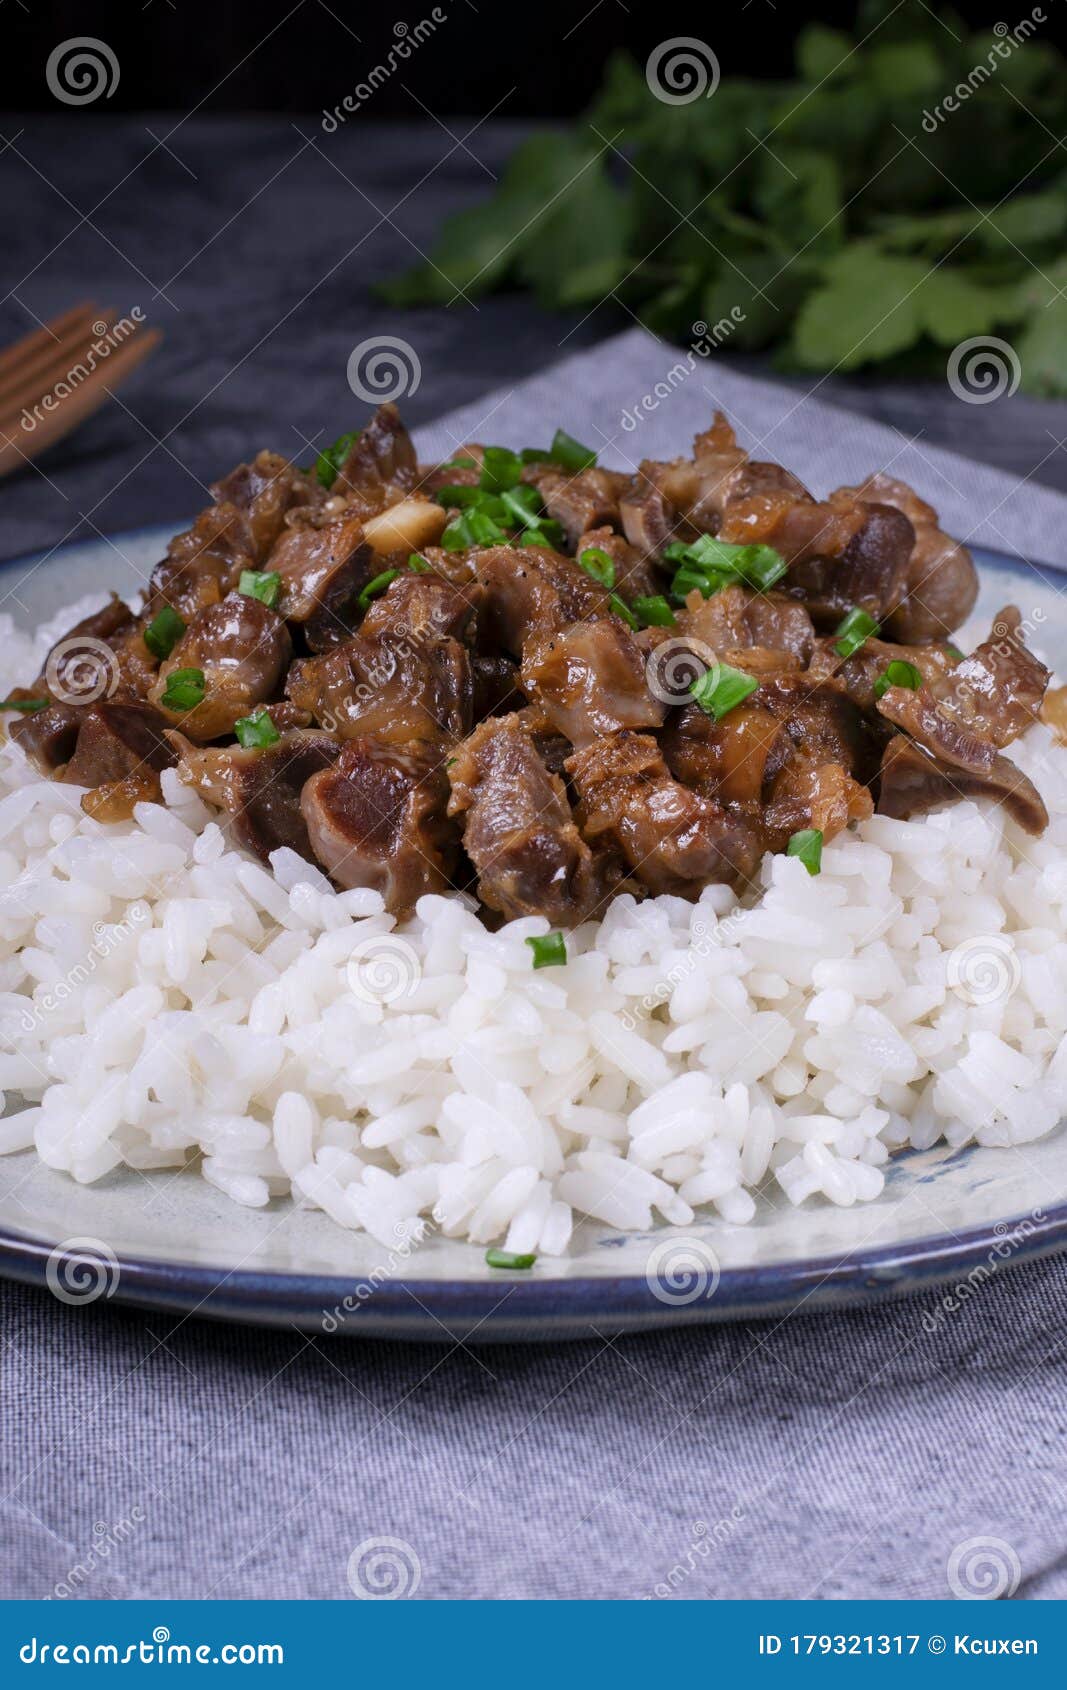 Stewed Chicken Gizzards on the Boiled Rice Stock Image - Image of ...